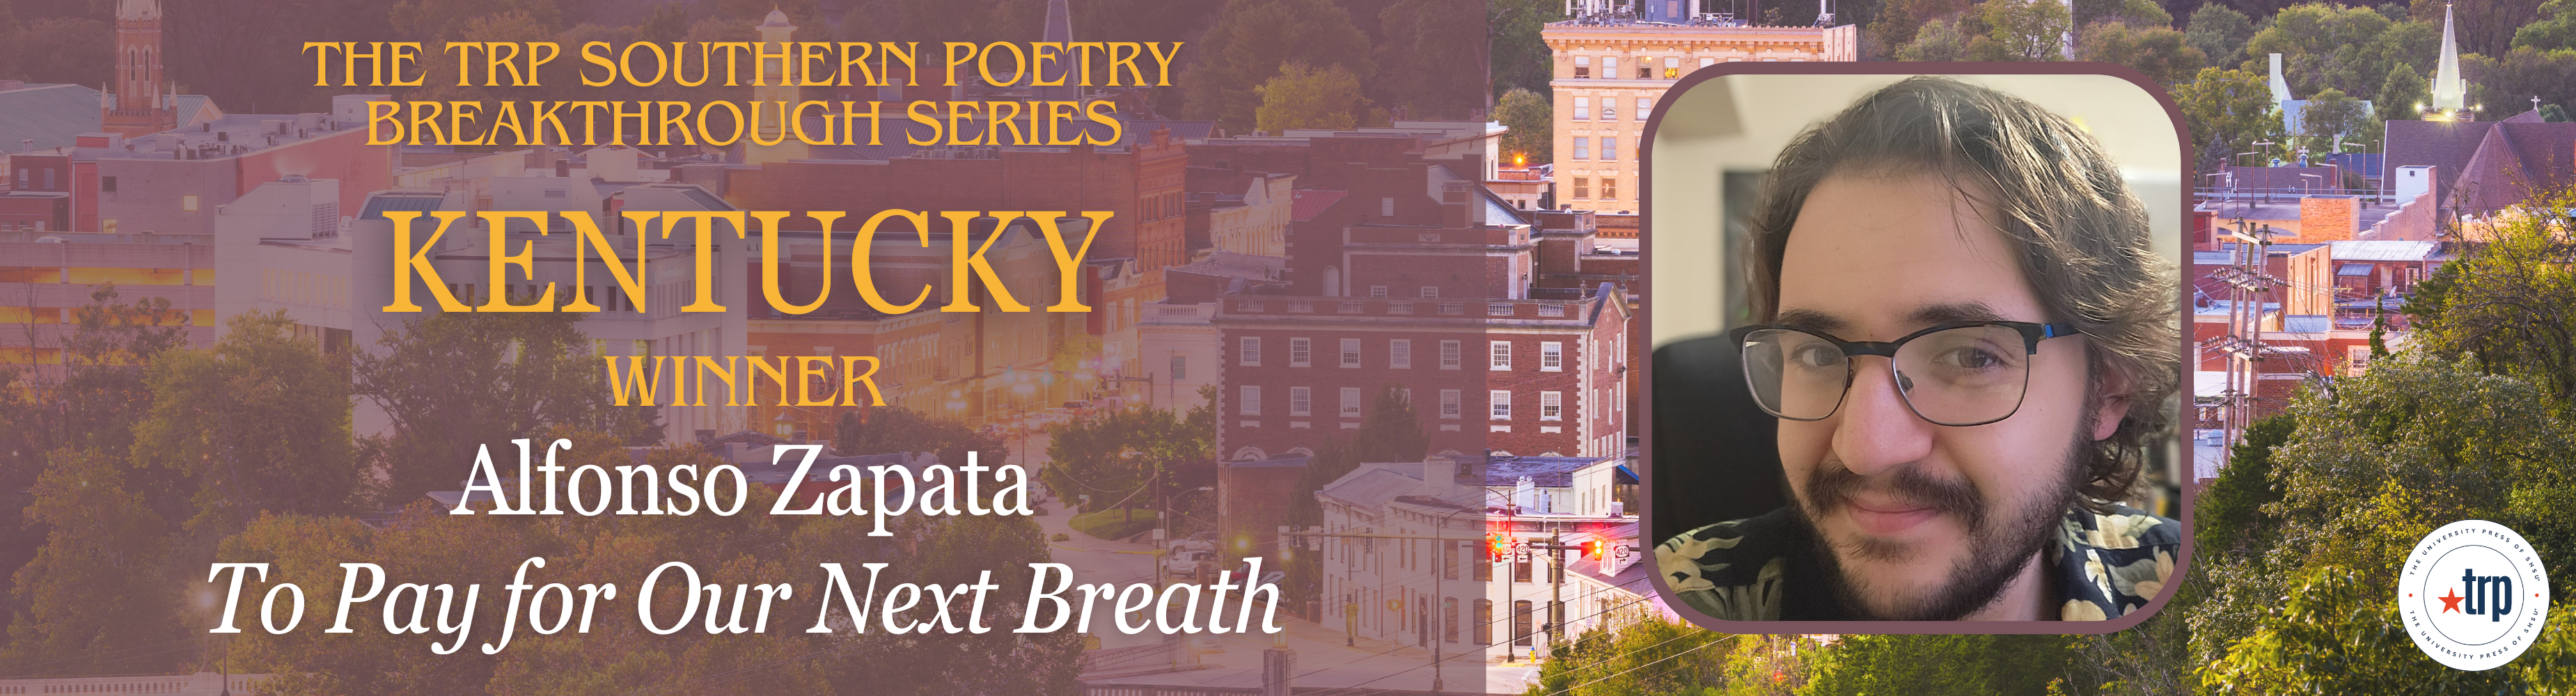 The TRP Southern Poetry Breakthrough Series Kentucky winner is Alfonso Zapata 